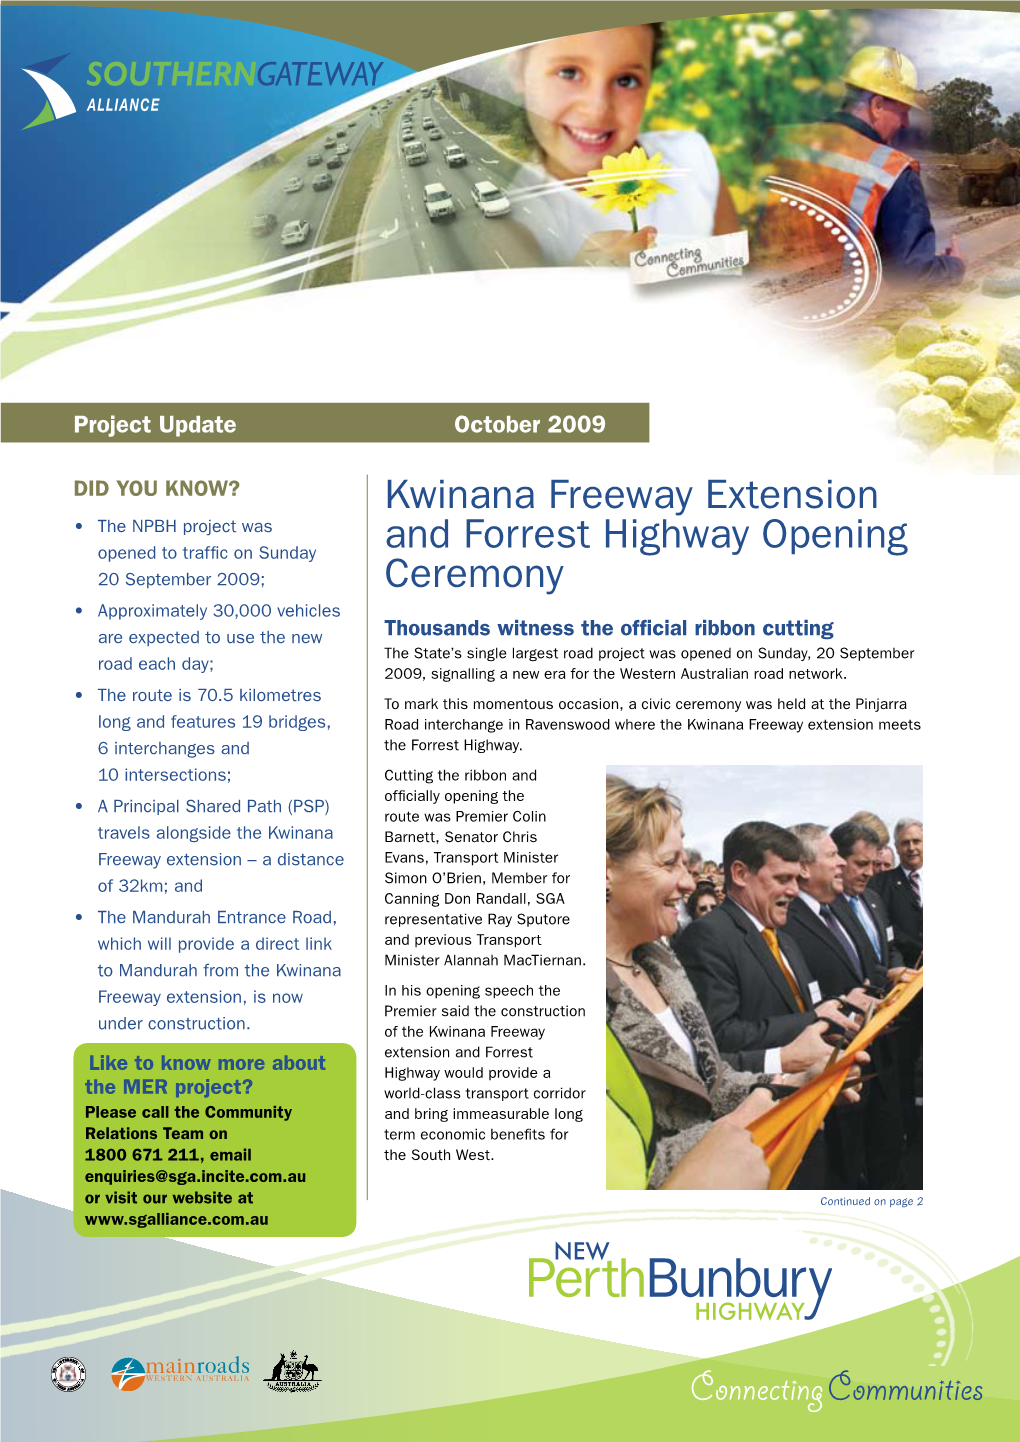 Kwinana Freeway Extension and Forrest Highway Opening Ceremony